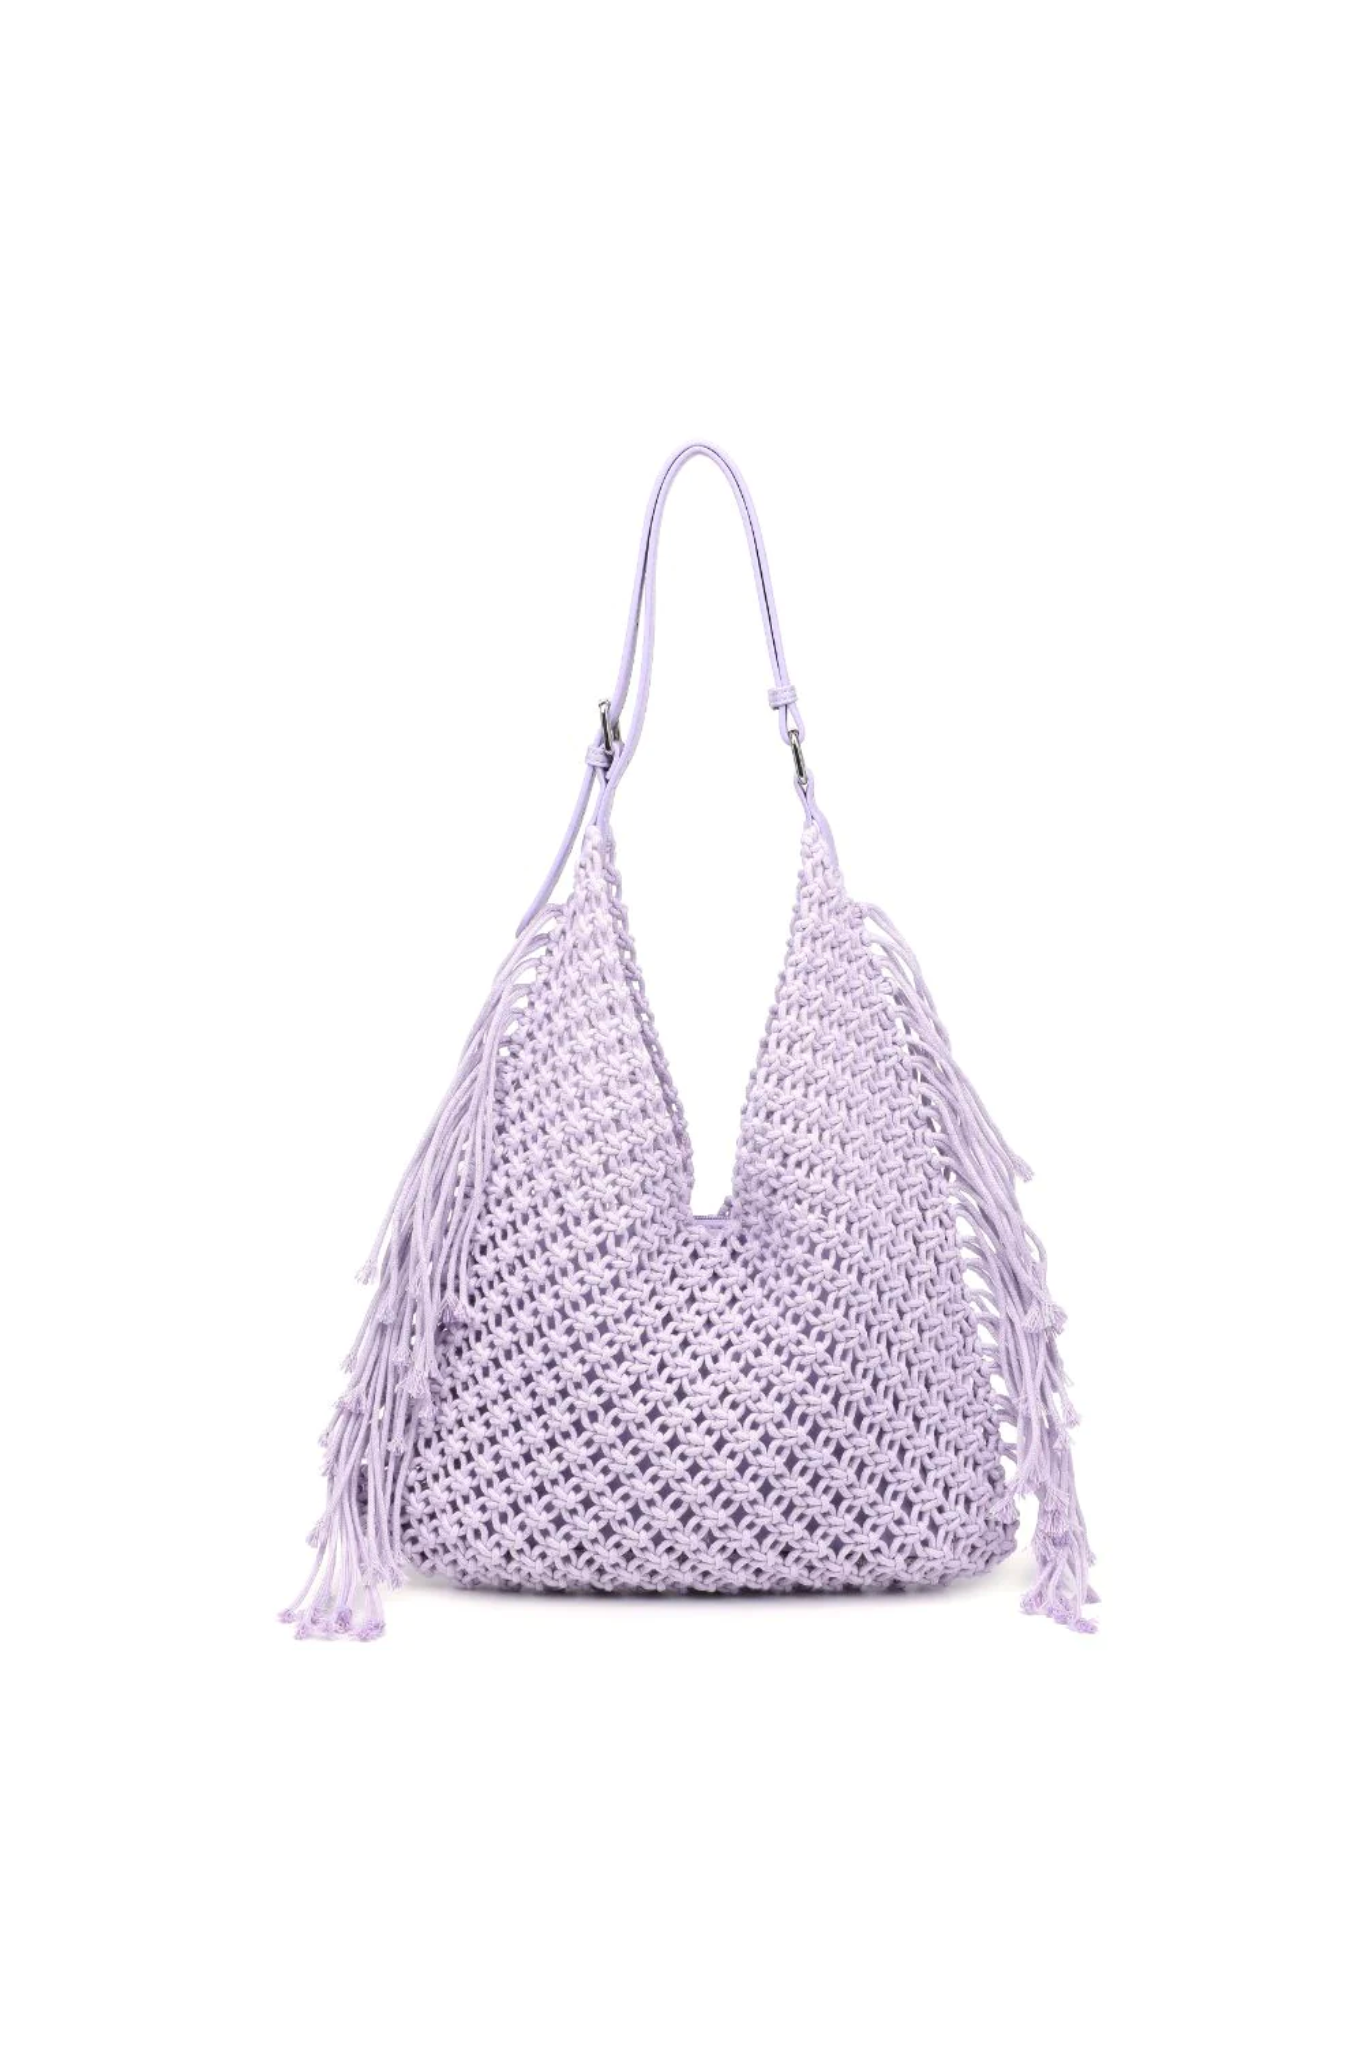 View 3 of Ariel Crochet Hobo Bag in Lilac, a Bags from Larrea Cove. Detail: .